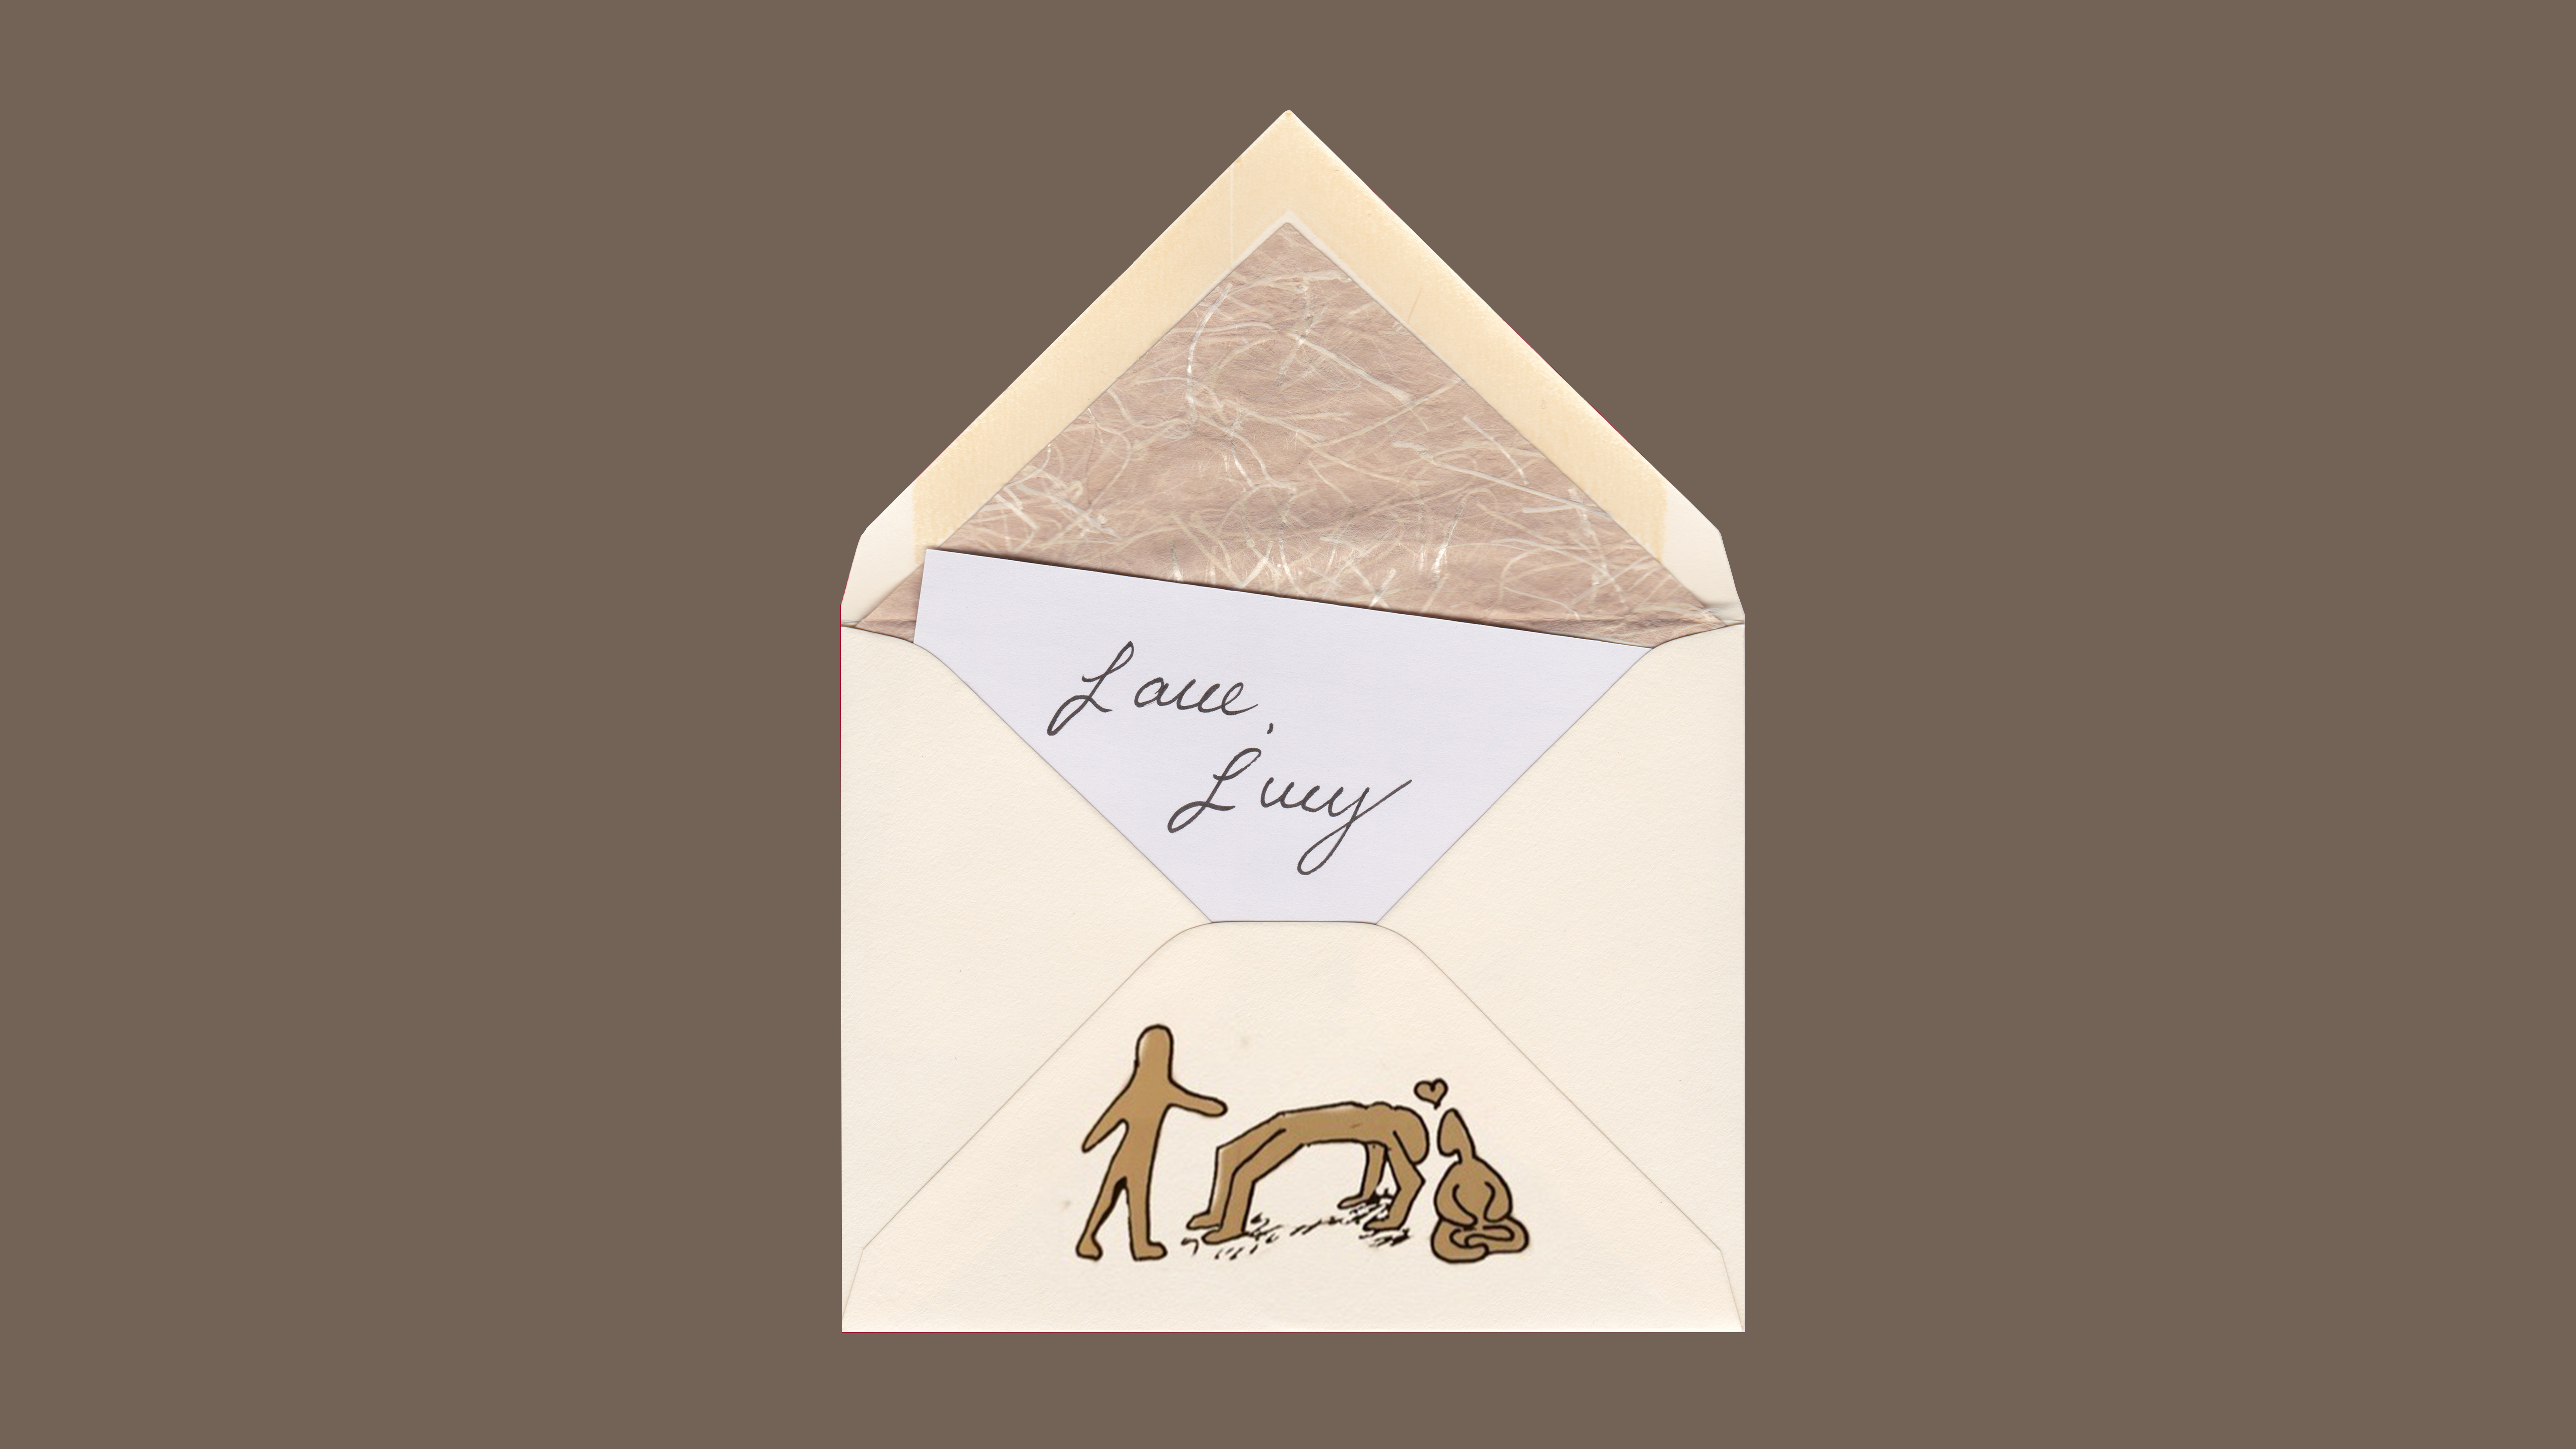 white envelope on brown background with figures on the envelope